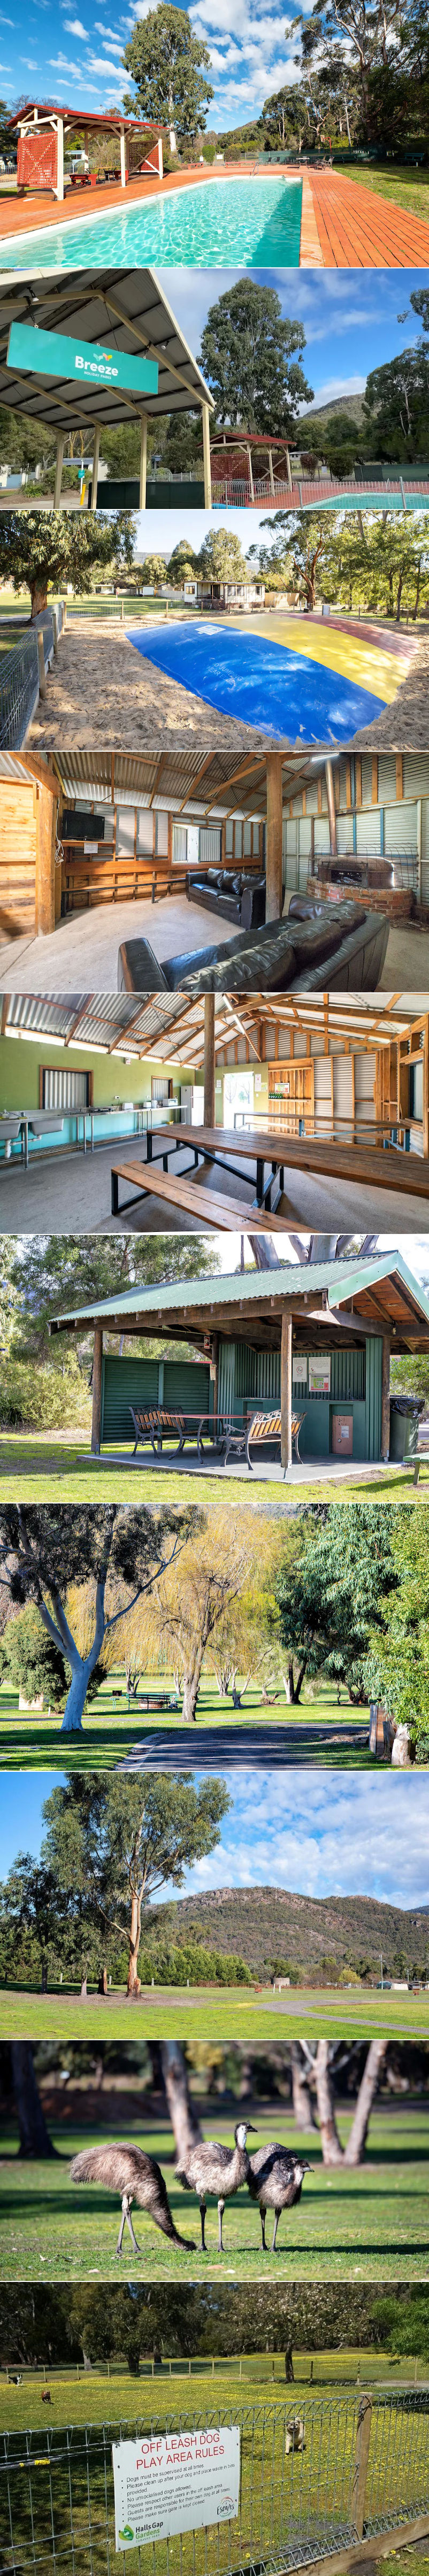 Breeze Holiday Parks Grampians - Grounds and facilities